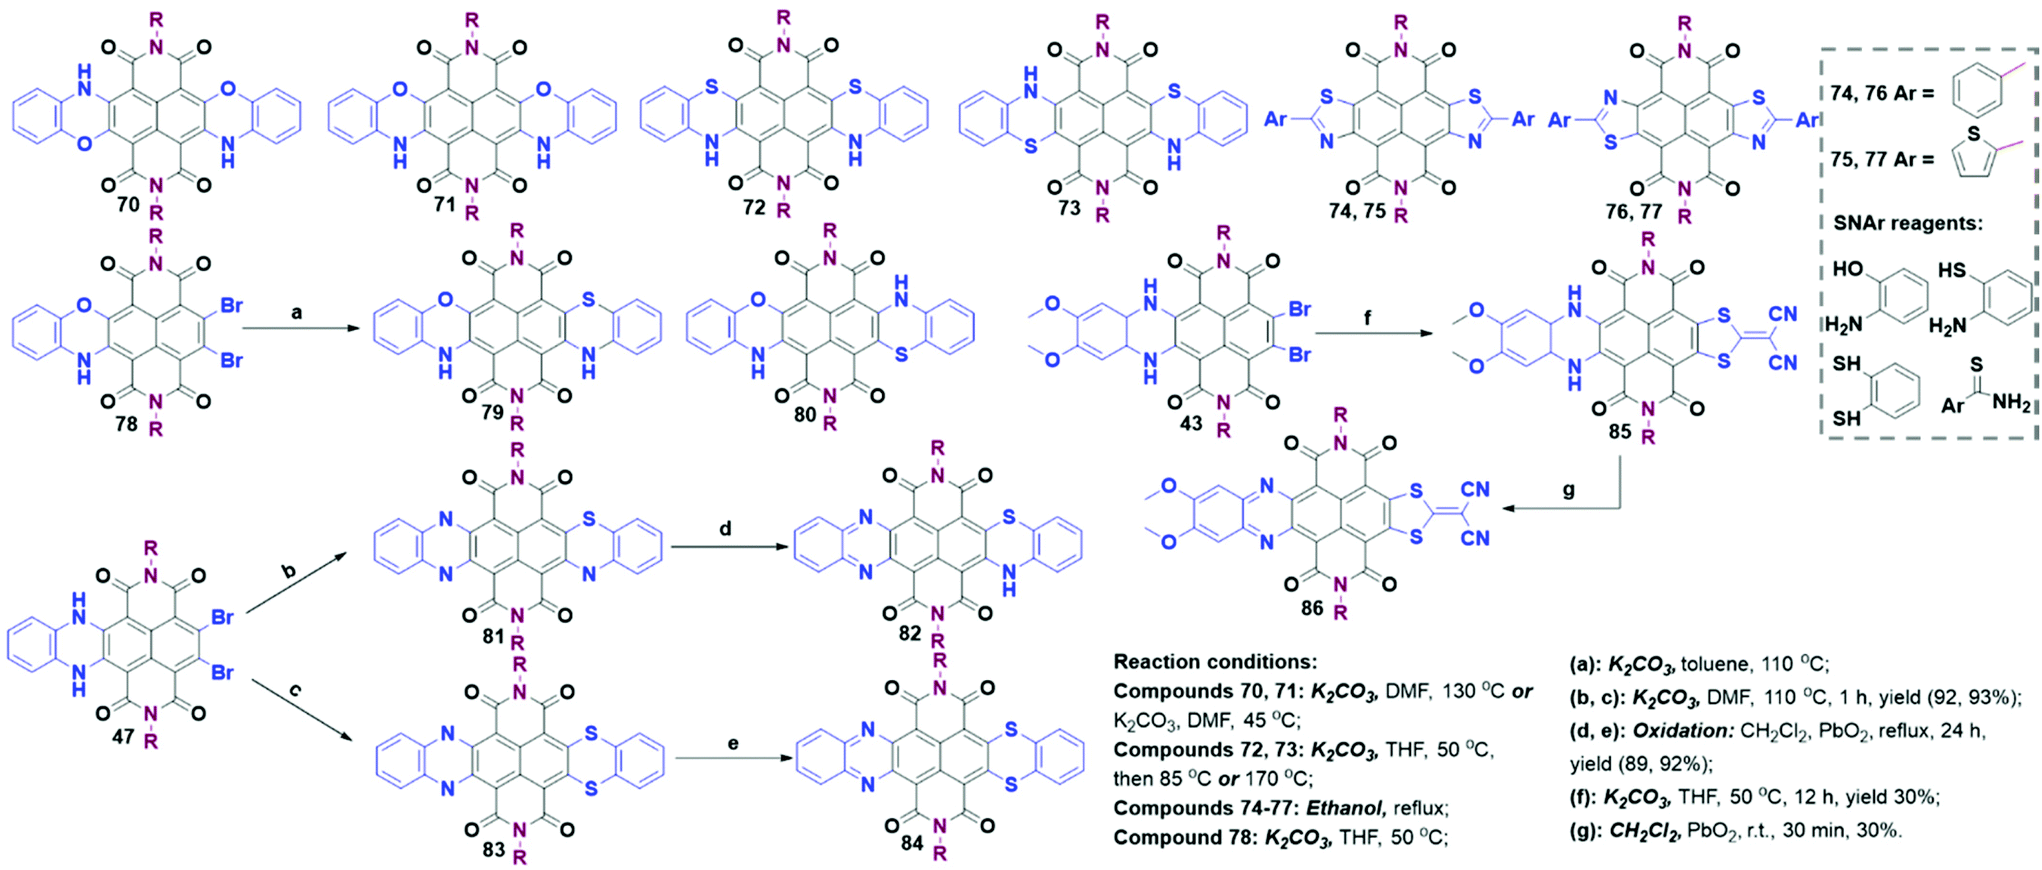 Recent Progress In The Usage Of Tetrabromo Substituted Naphthalenetetracarboxylic Dianhydride As A Building Block To Construct Organic Semiconductors And Their Applications Organic Chemistry Frontiers Rsc Publishing